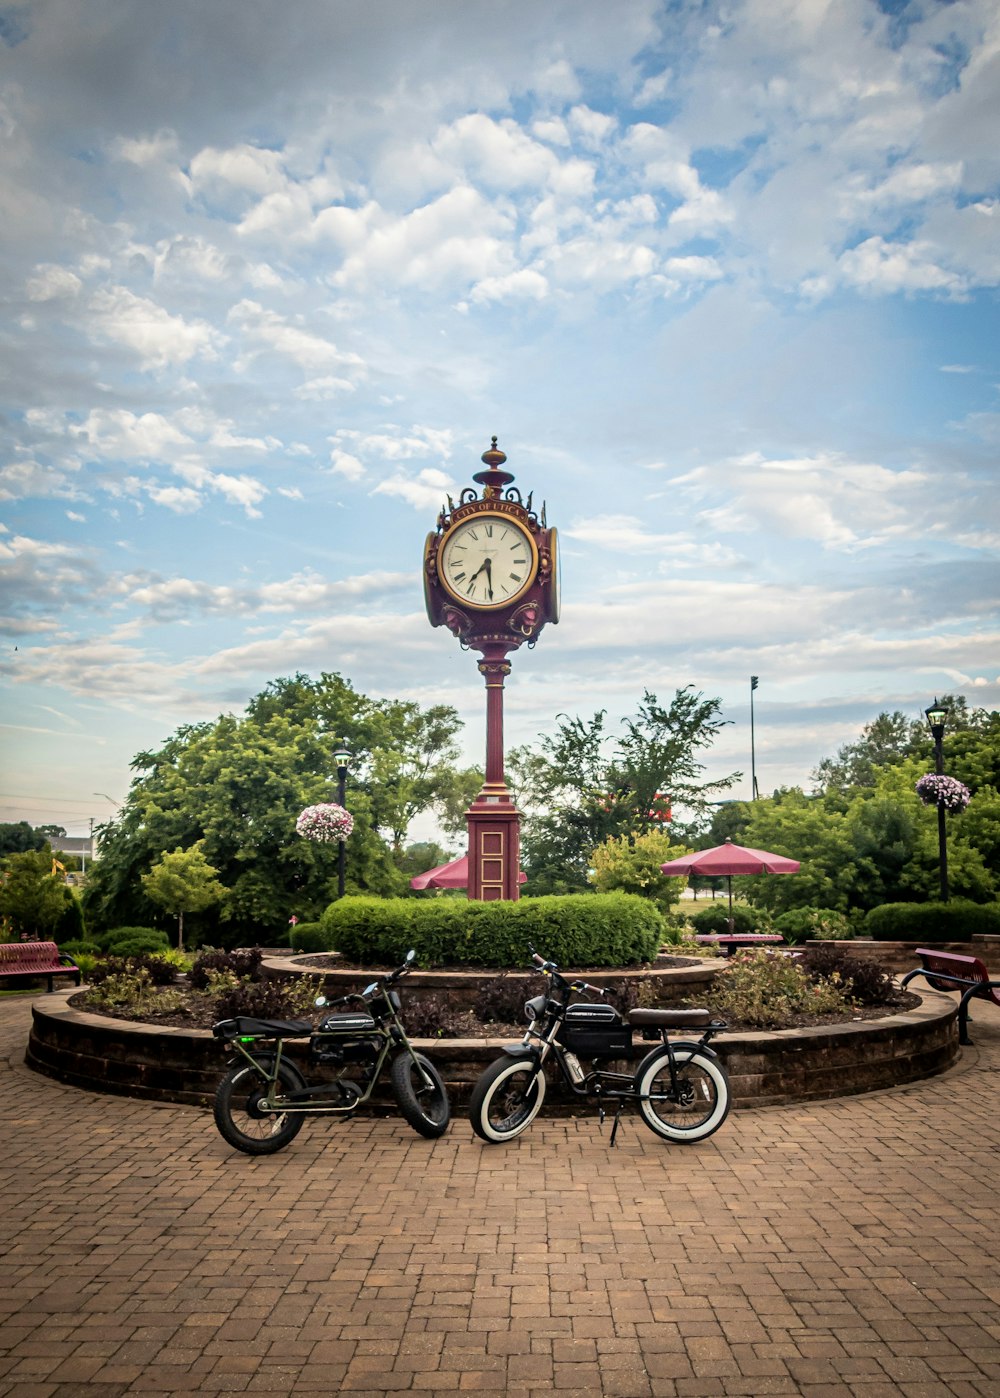 two standard motorcycles parked near a tower clock